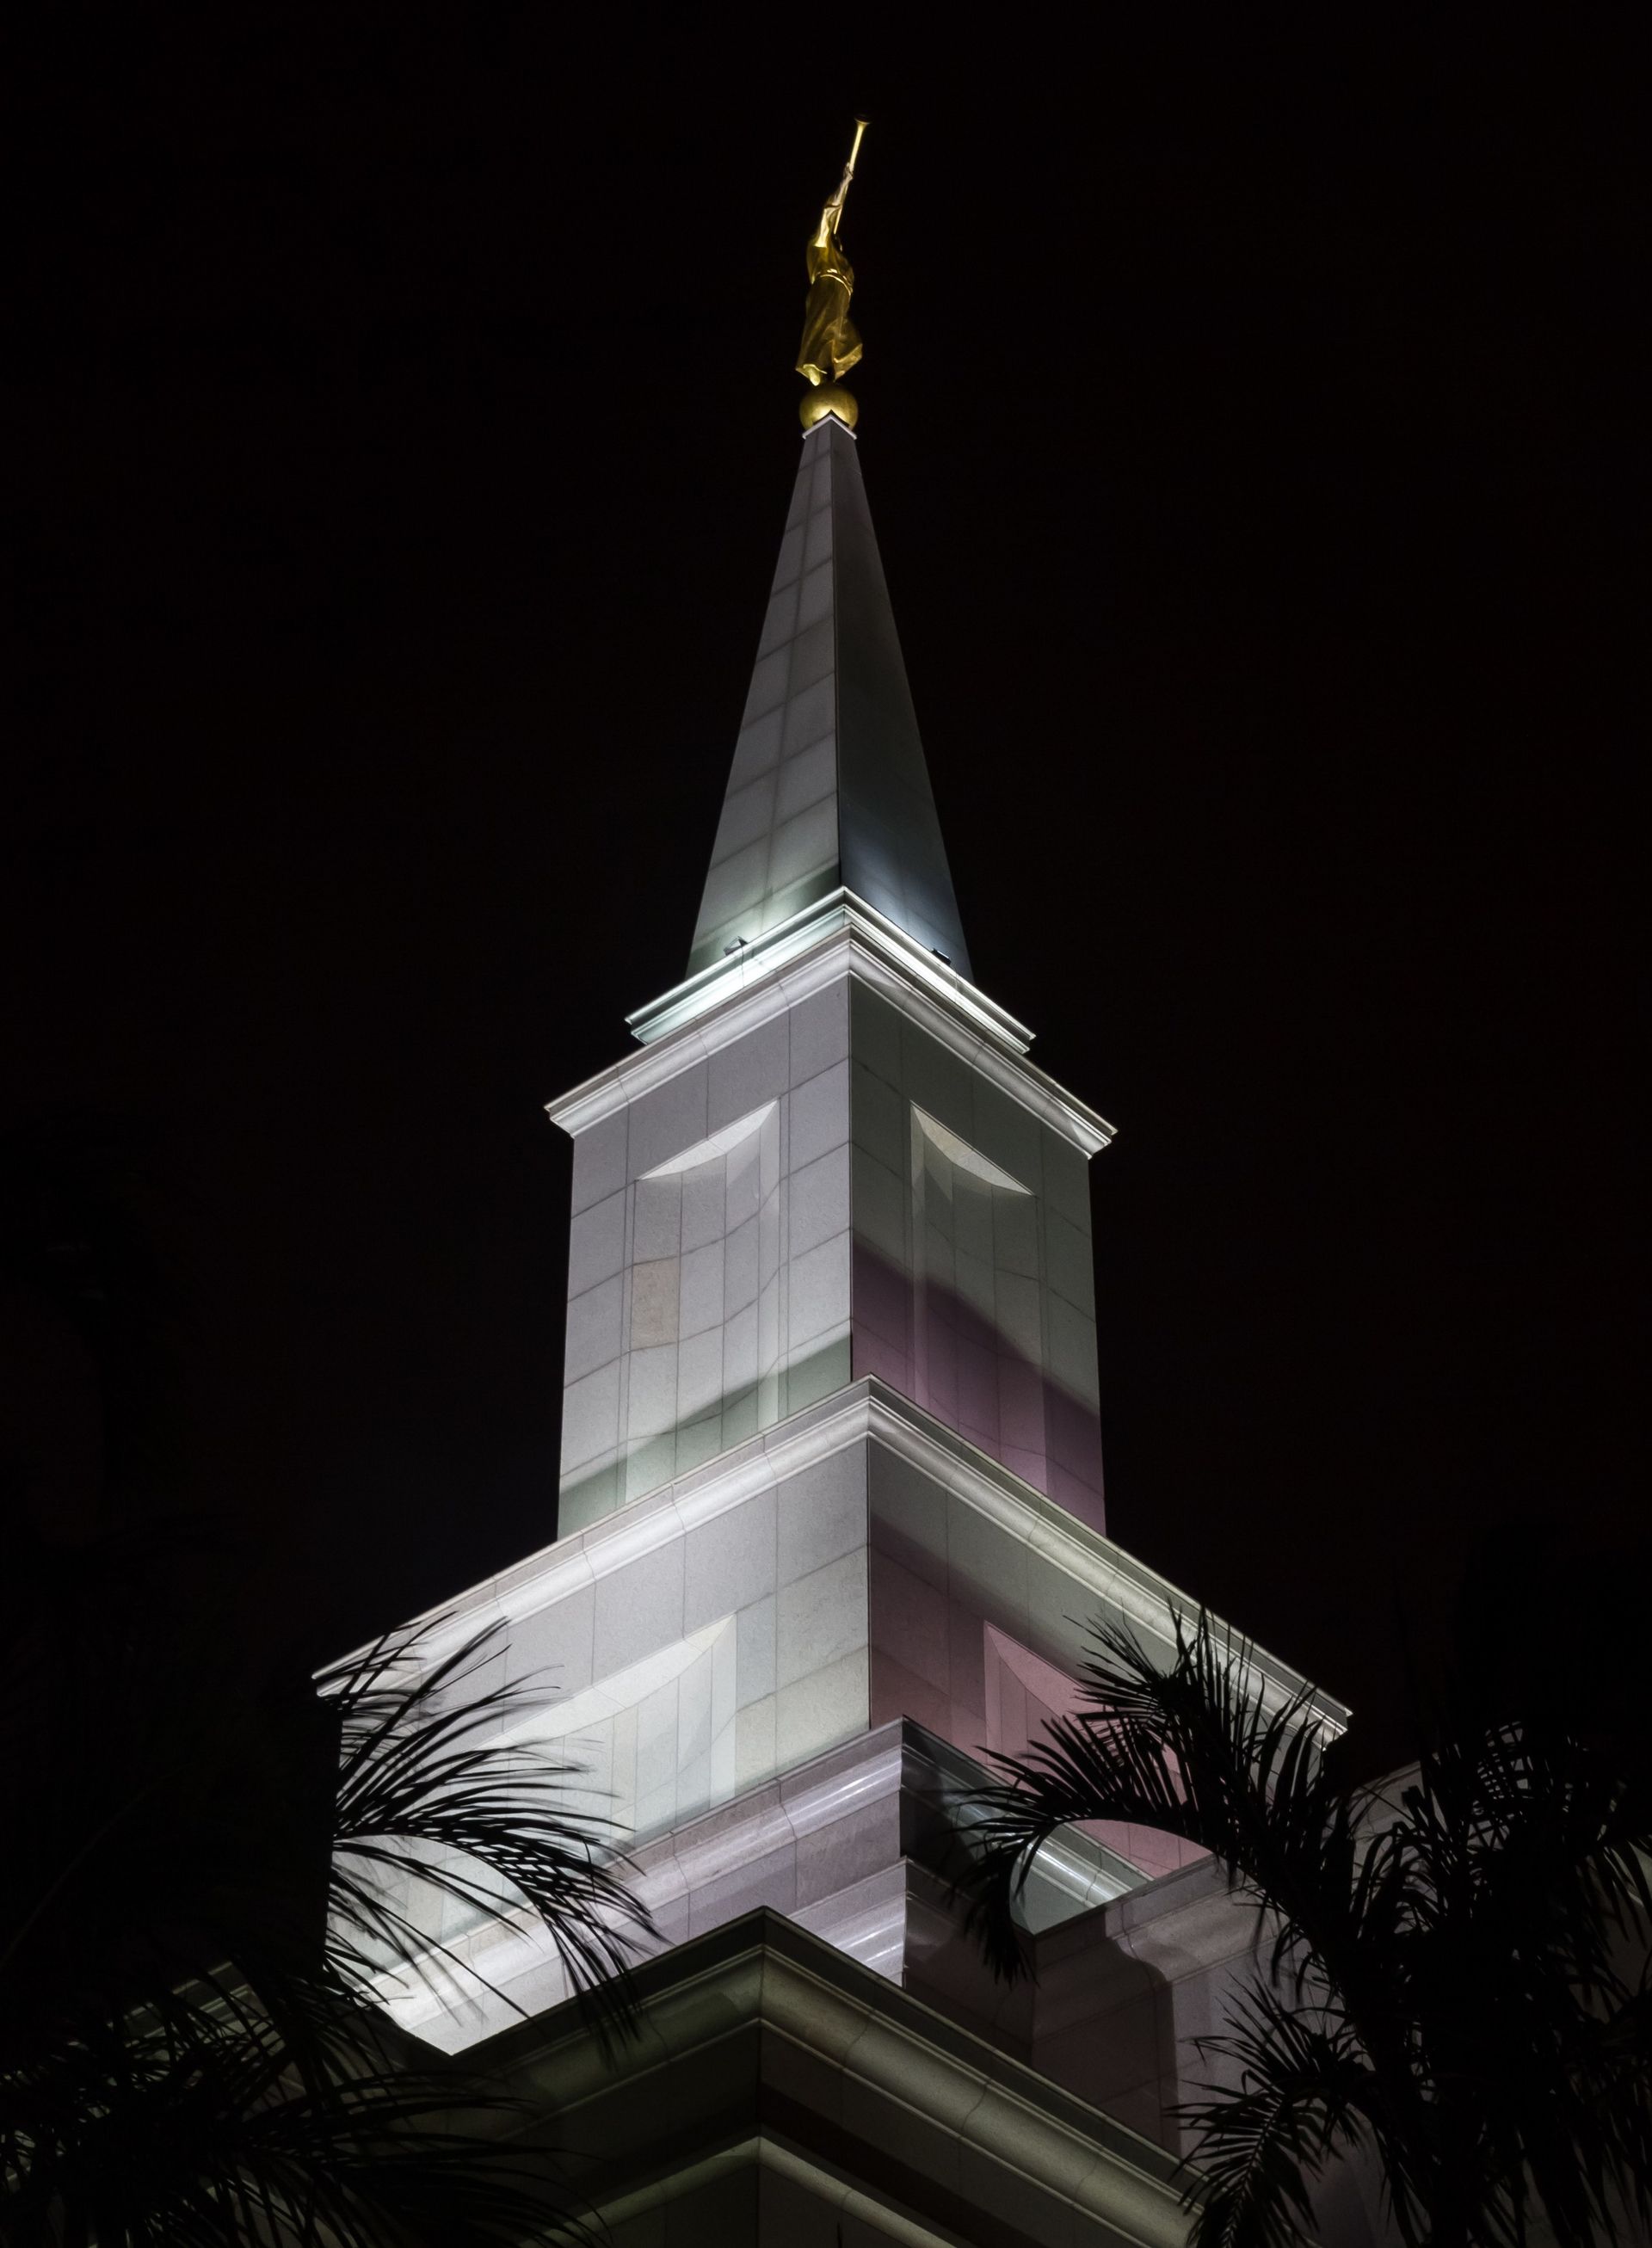 Lights shine on the spire of the Guayaquil Ecuador Temple at night.